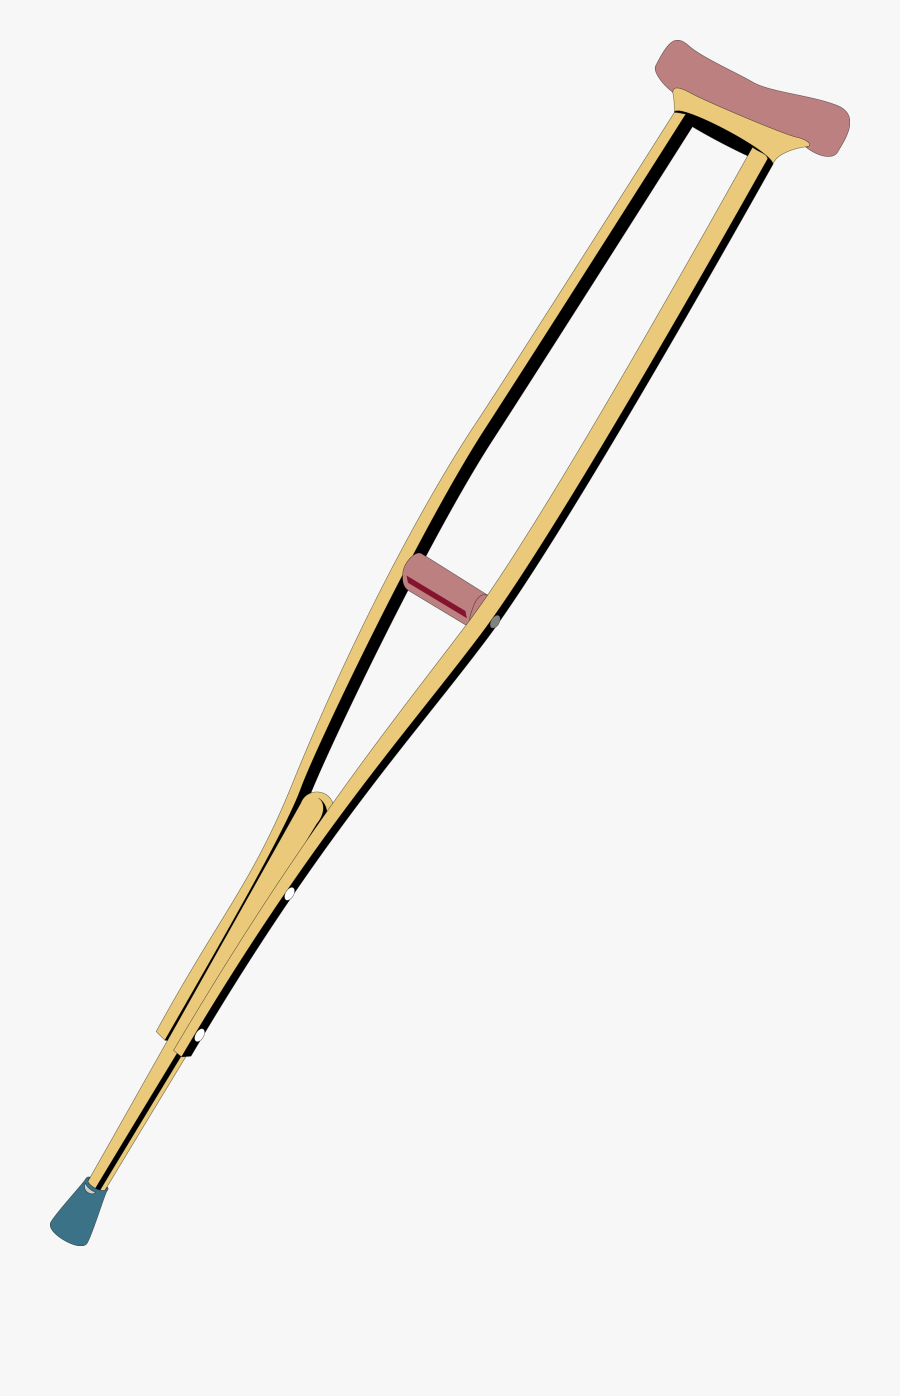 Crutches Png, Download Png Image With Transparent Background, - Transparent Background Crutch Png Transparent, Transparent Clipart